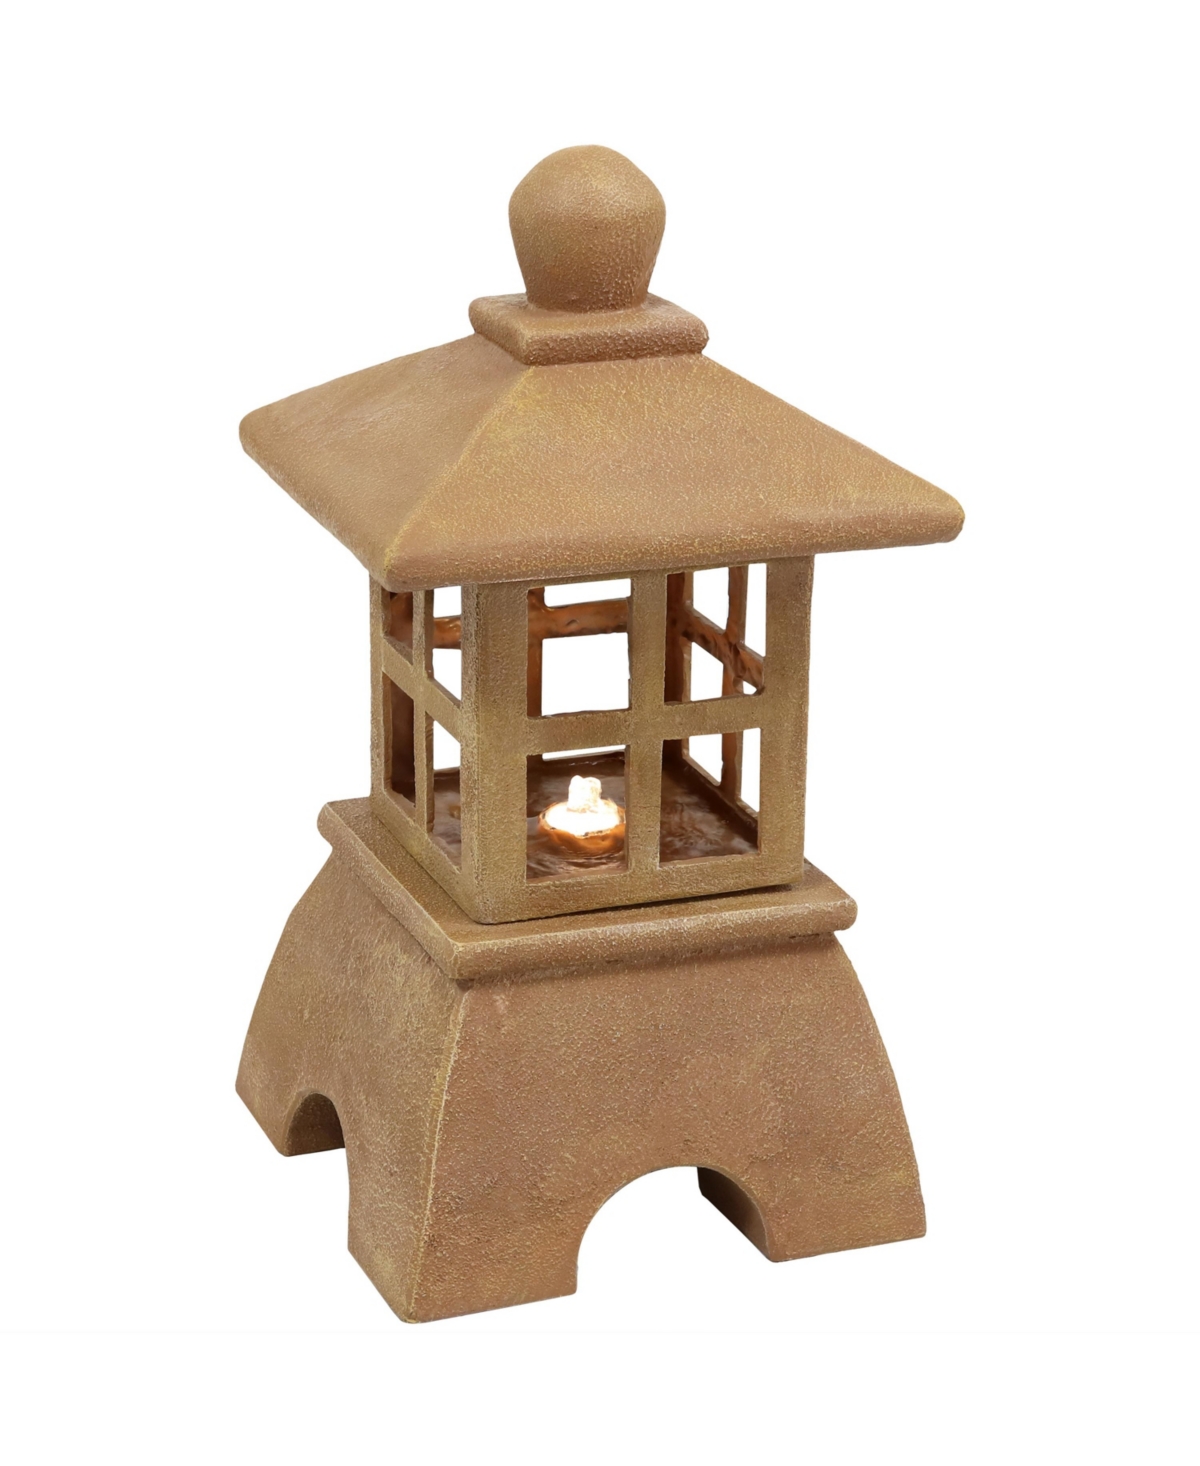 Asian Pagoda Resin Outdoor Water Fountain with Led Lights - 23 in - Light Brown